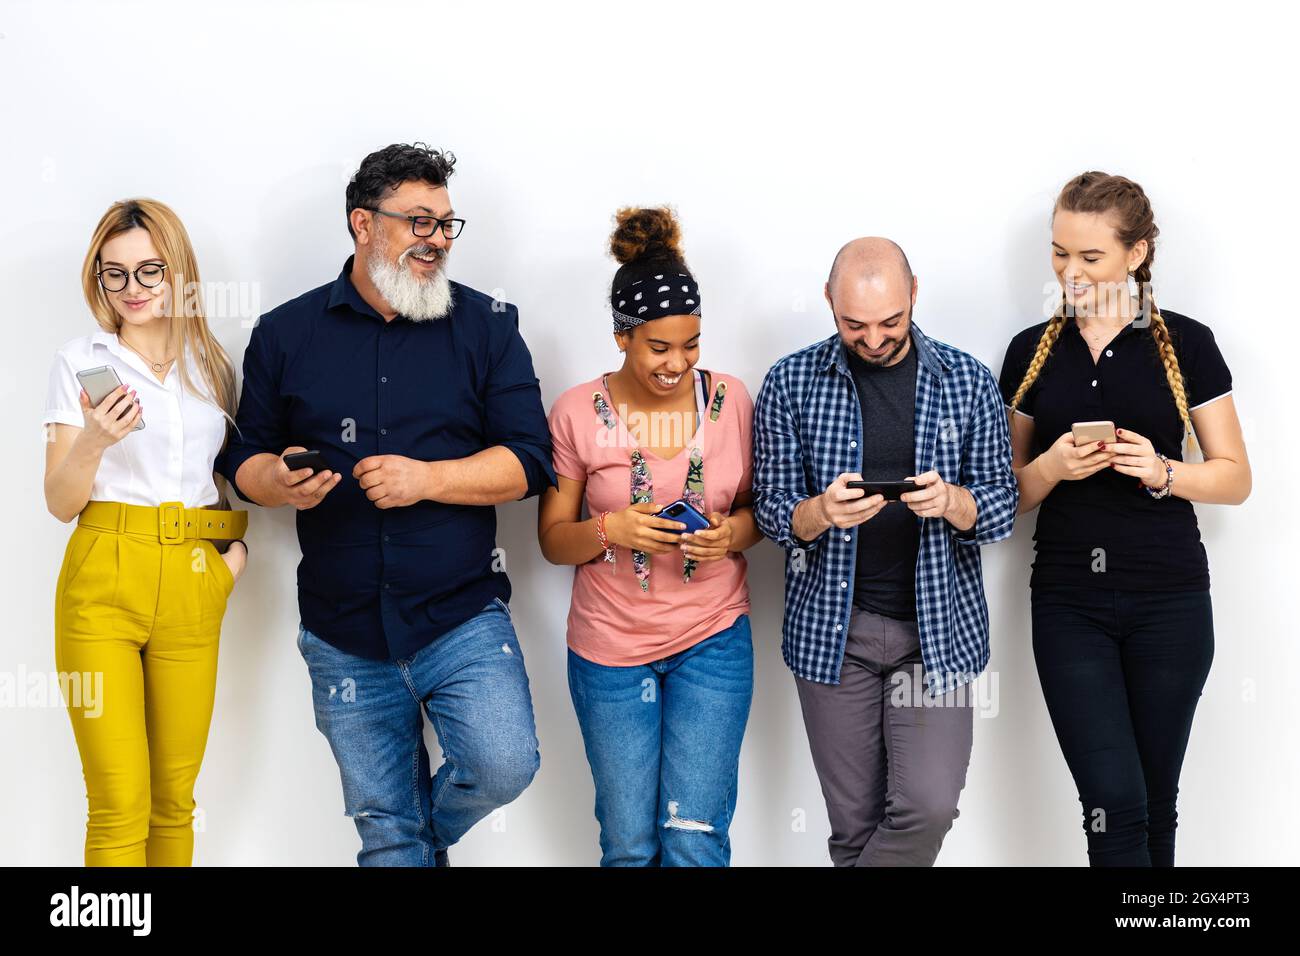 Multiracial friends laughing while using mobile phones against wall Stock Photo